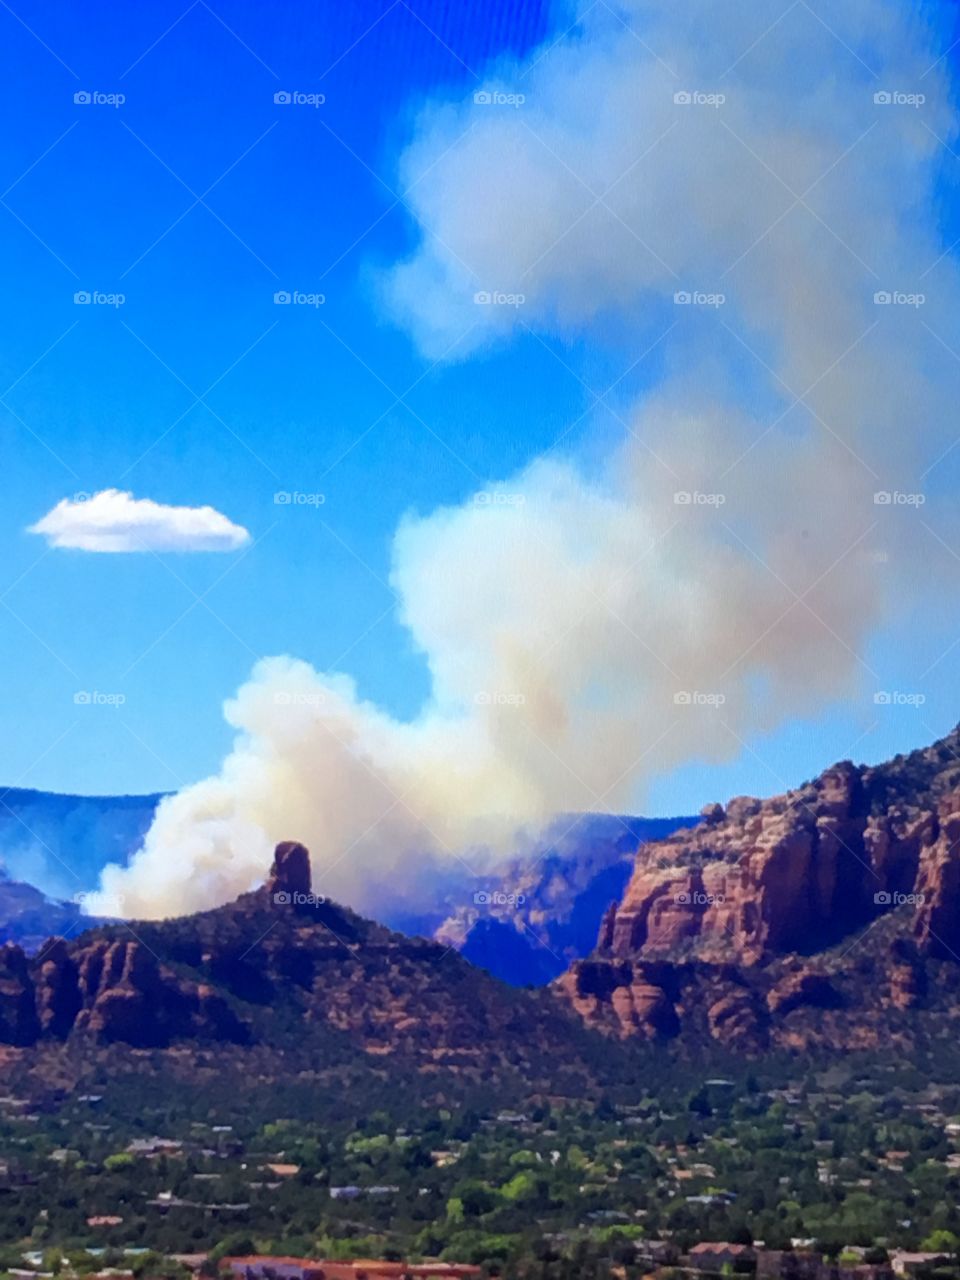 The smoke from an airplane crash just outside Sedona, Arizona. I was on a Jeep tour of the desert around the town, which had to be cut short. Two people died, and at the same time, I was meditating at one of the vortexes.